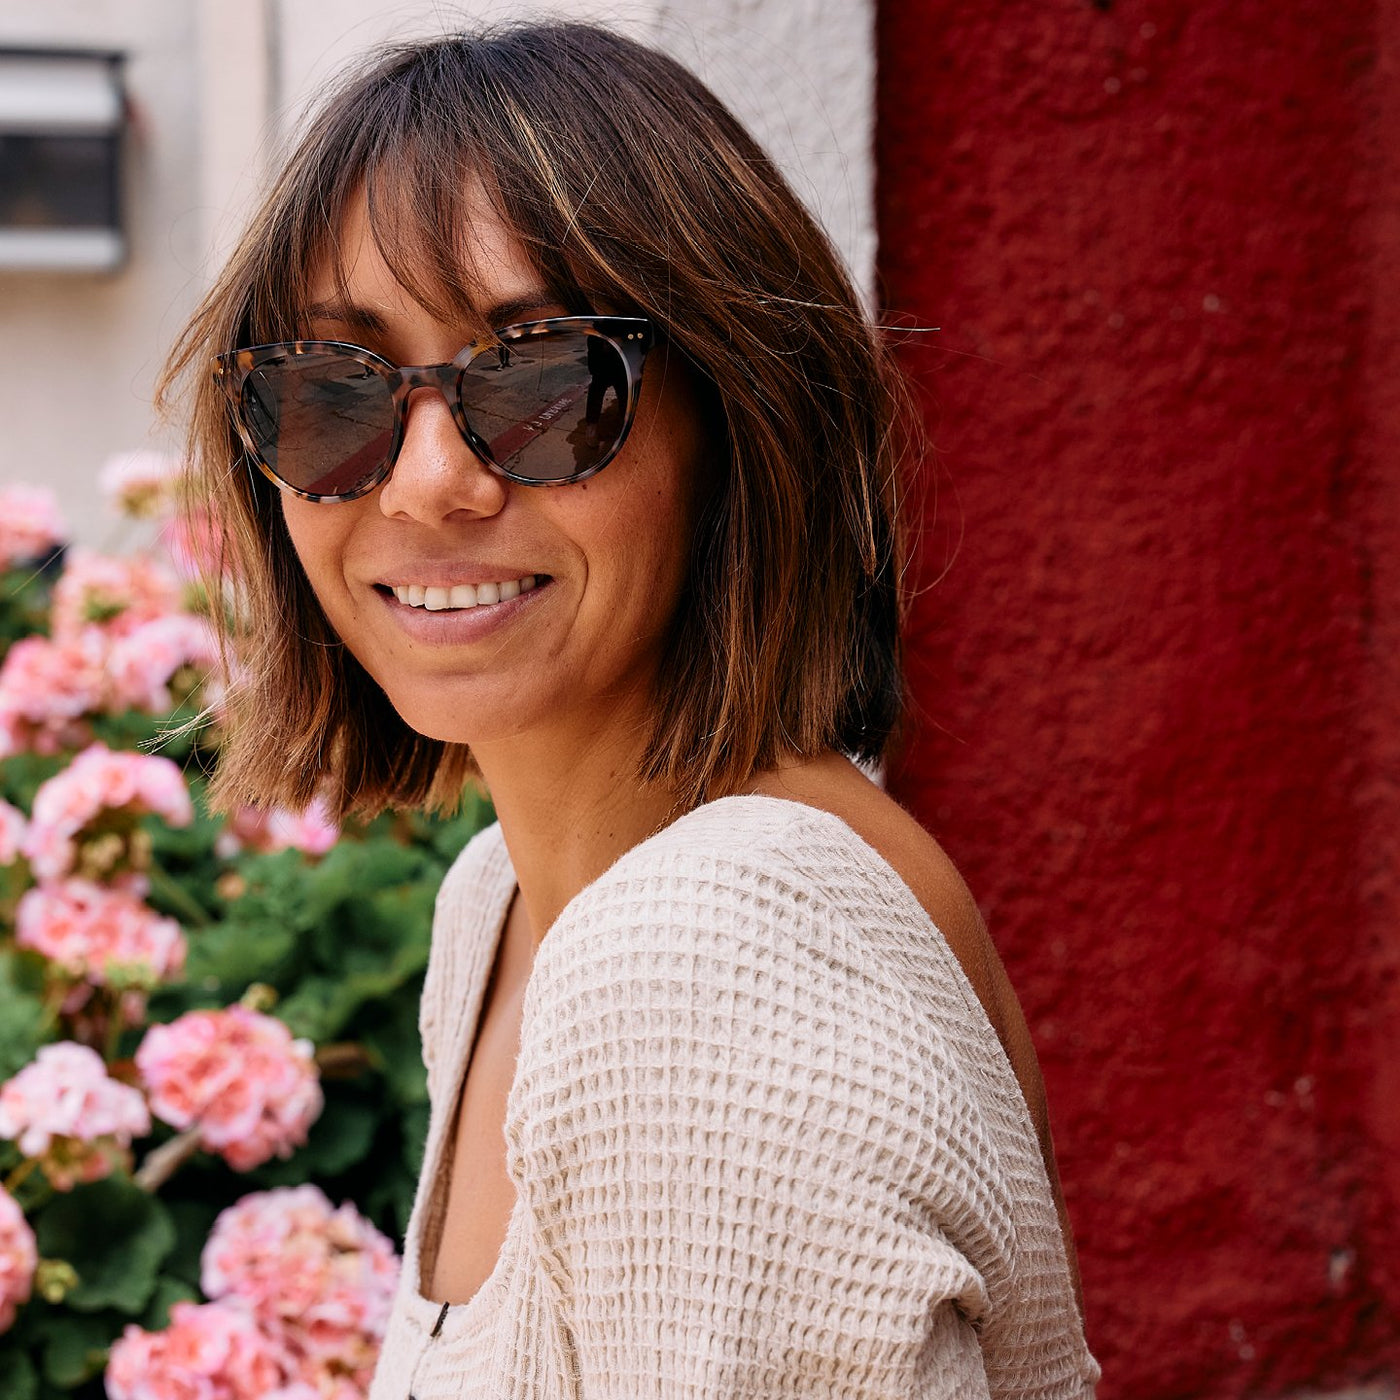 Woman sitting in front of flowers wearing sunglasses